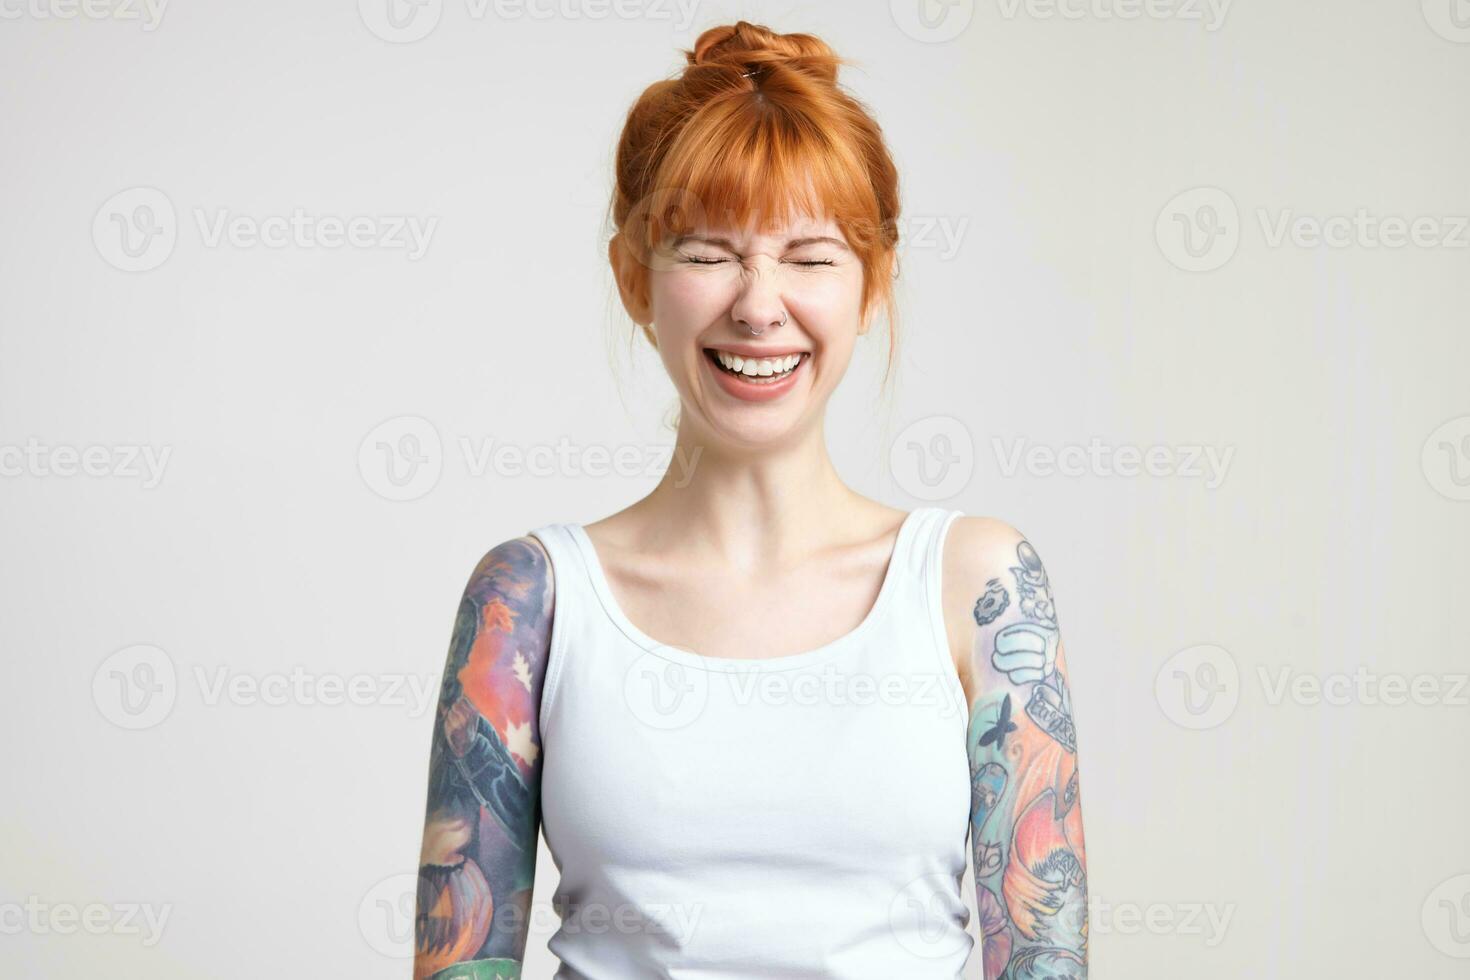 Joyful young attractive redhead woman with tattoos keeping her eyes closed while laughing cheerfully, dressed in white shirt while posing over white background photo